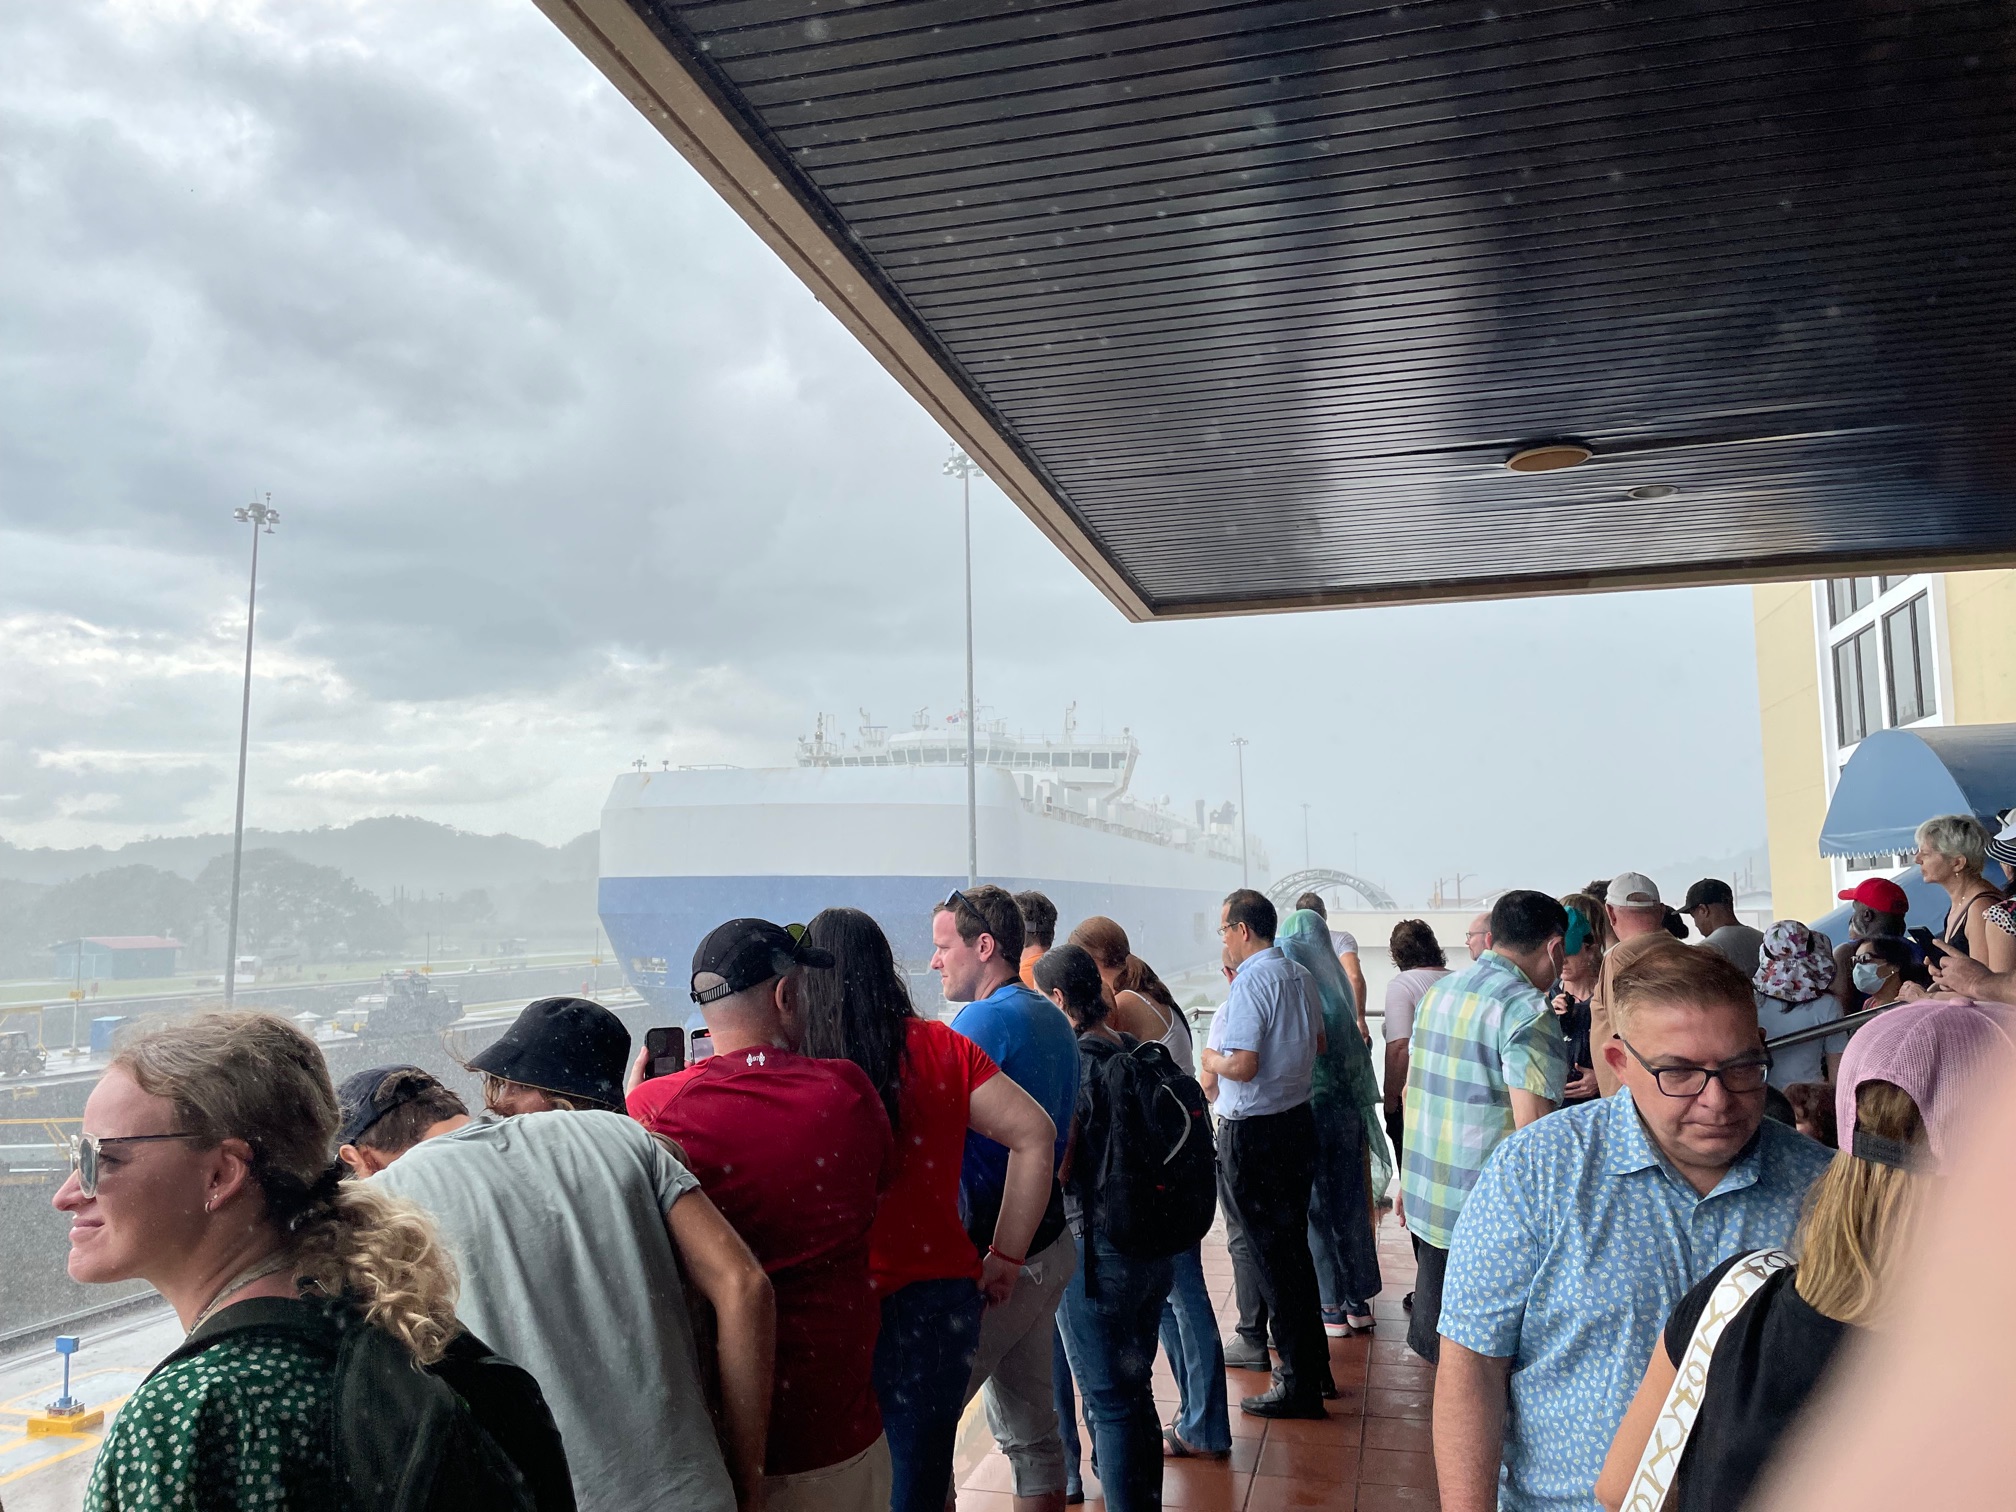 crowd gathered to watch a blue and white vehicle carrier passing through the panama canal at the miraflores locks visitor center